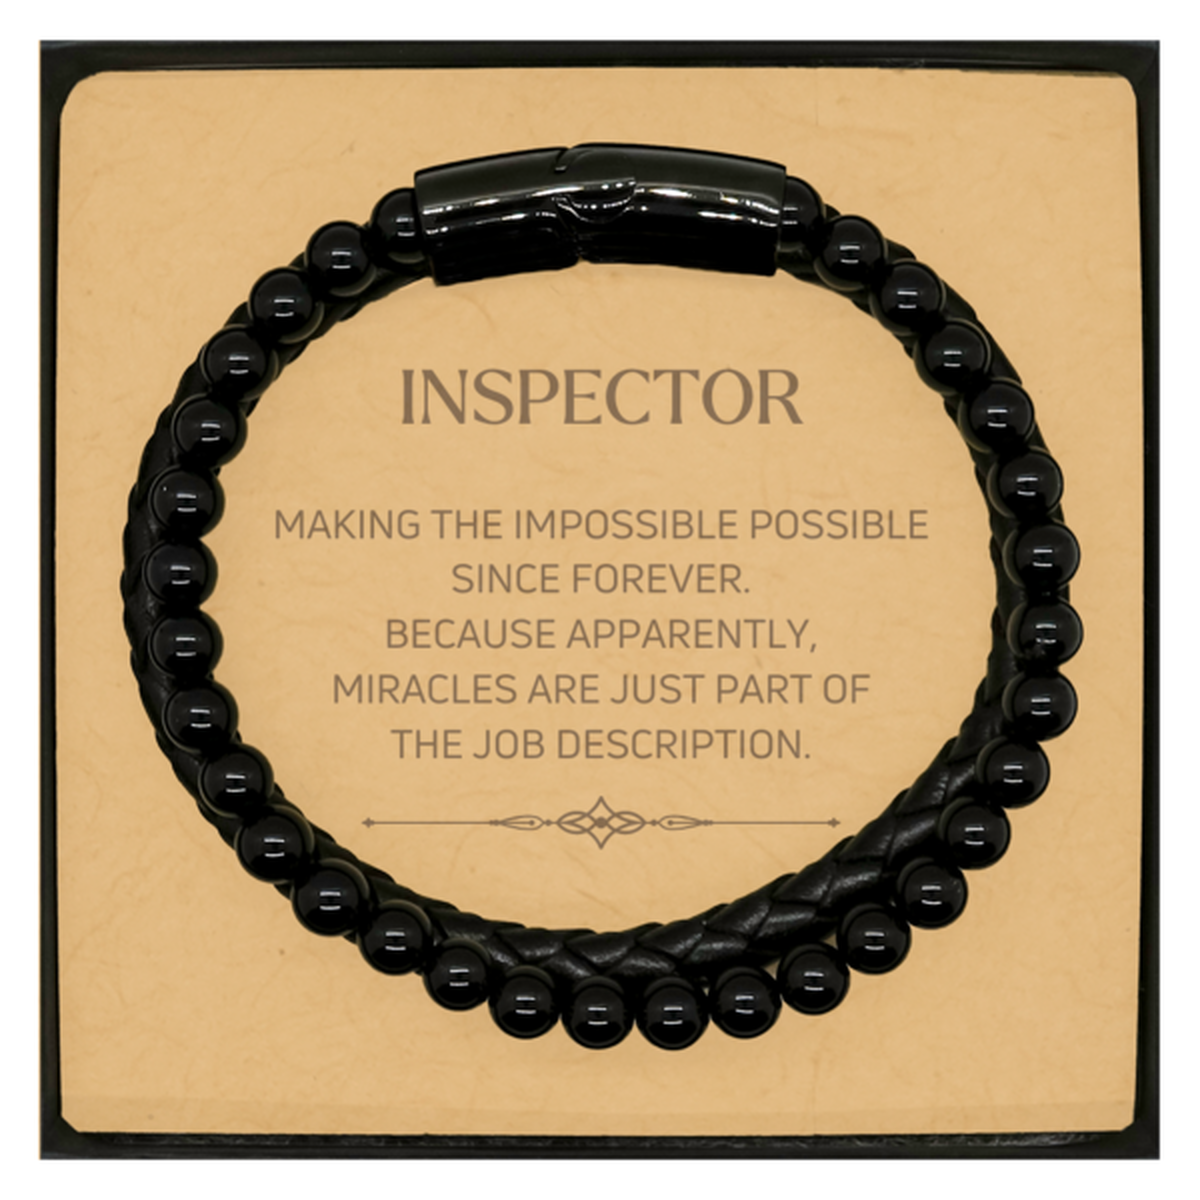 Funny Inspector Gifts, Miracles are just part of the job description, Inspirational Birthday Christmas Stone Leather Bracelets For Inspector, Men, Women, Coworkers, Friends, Boss